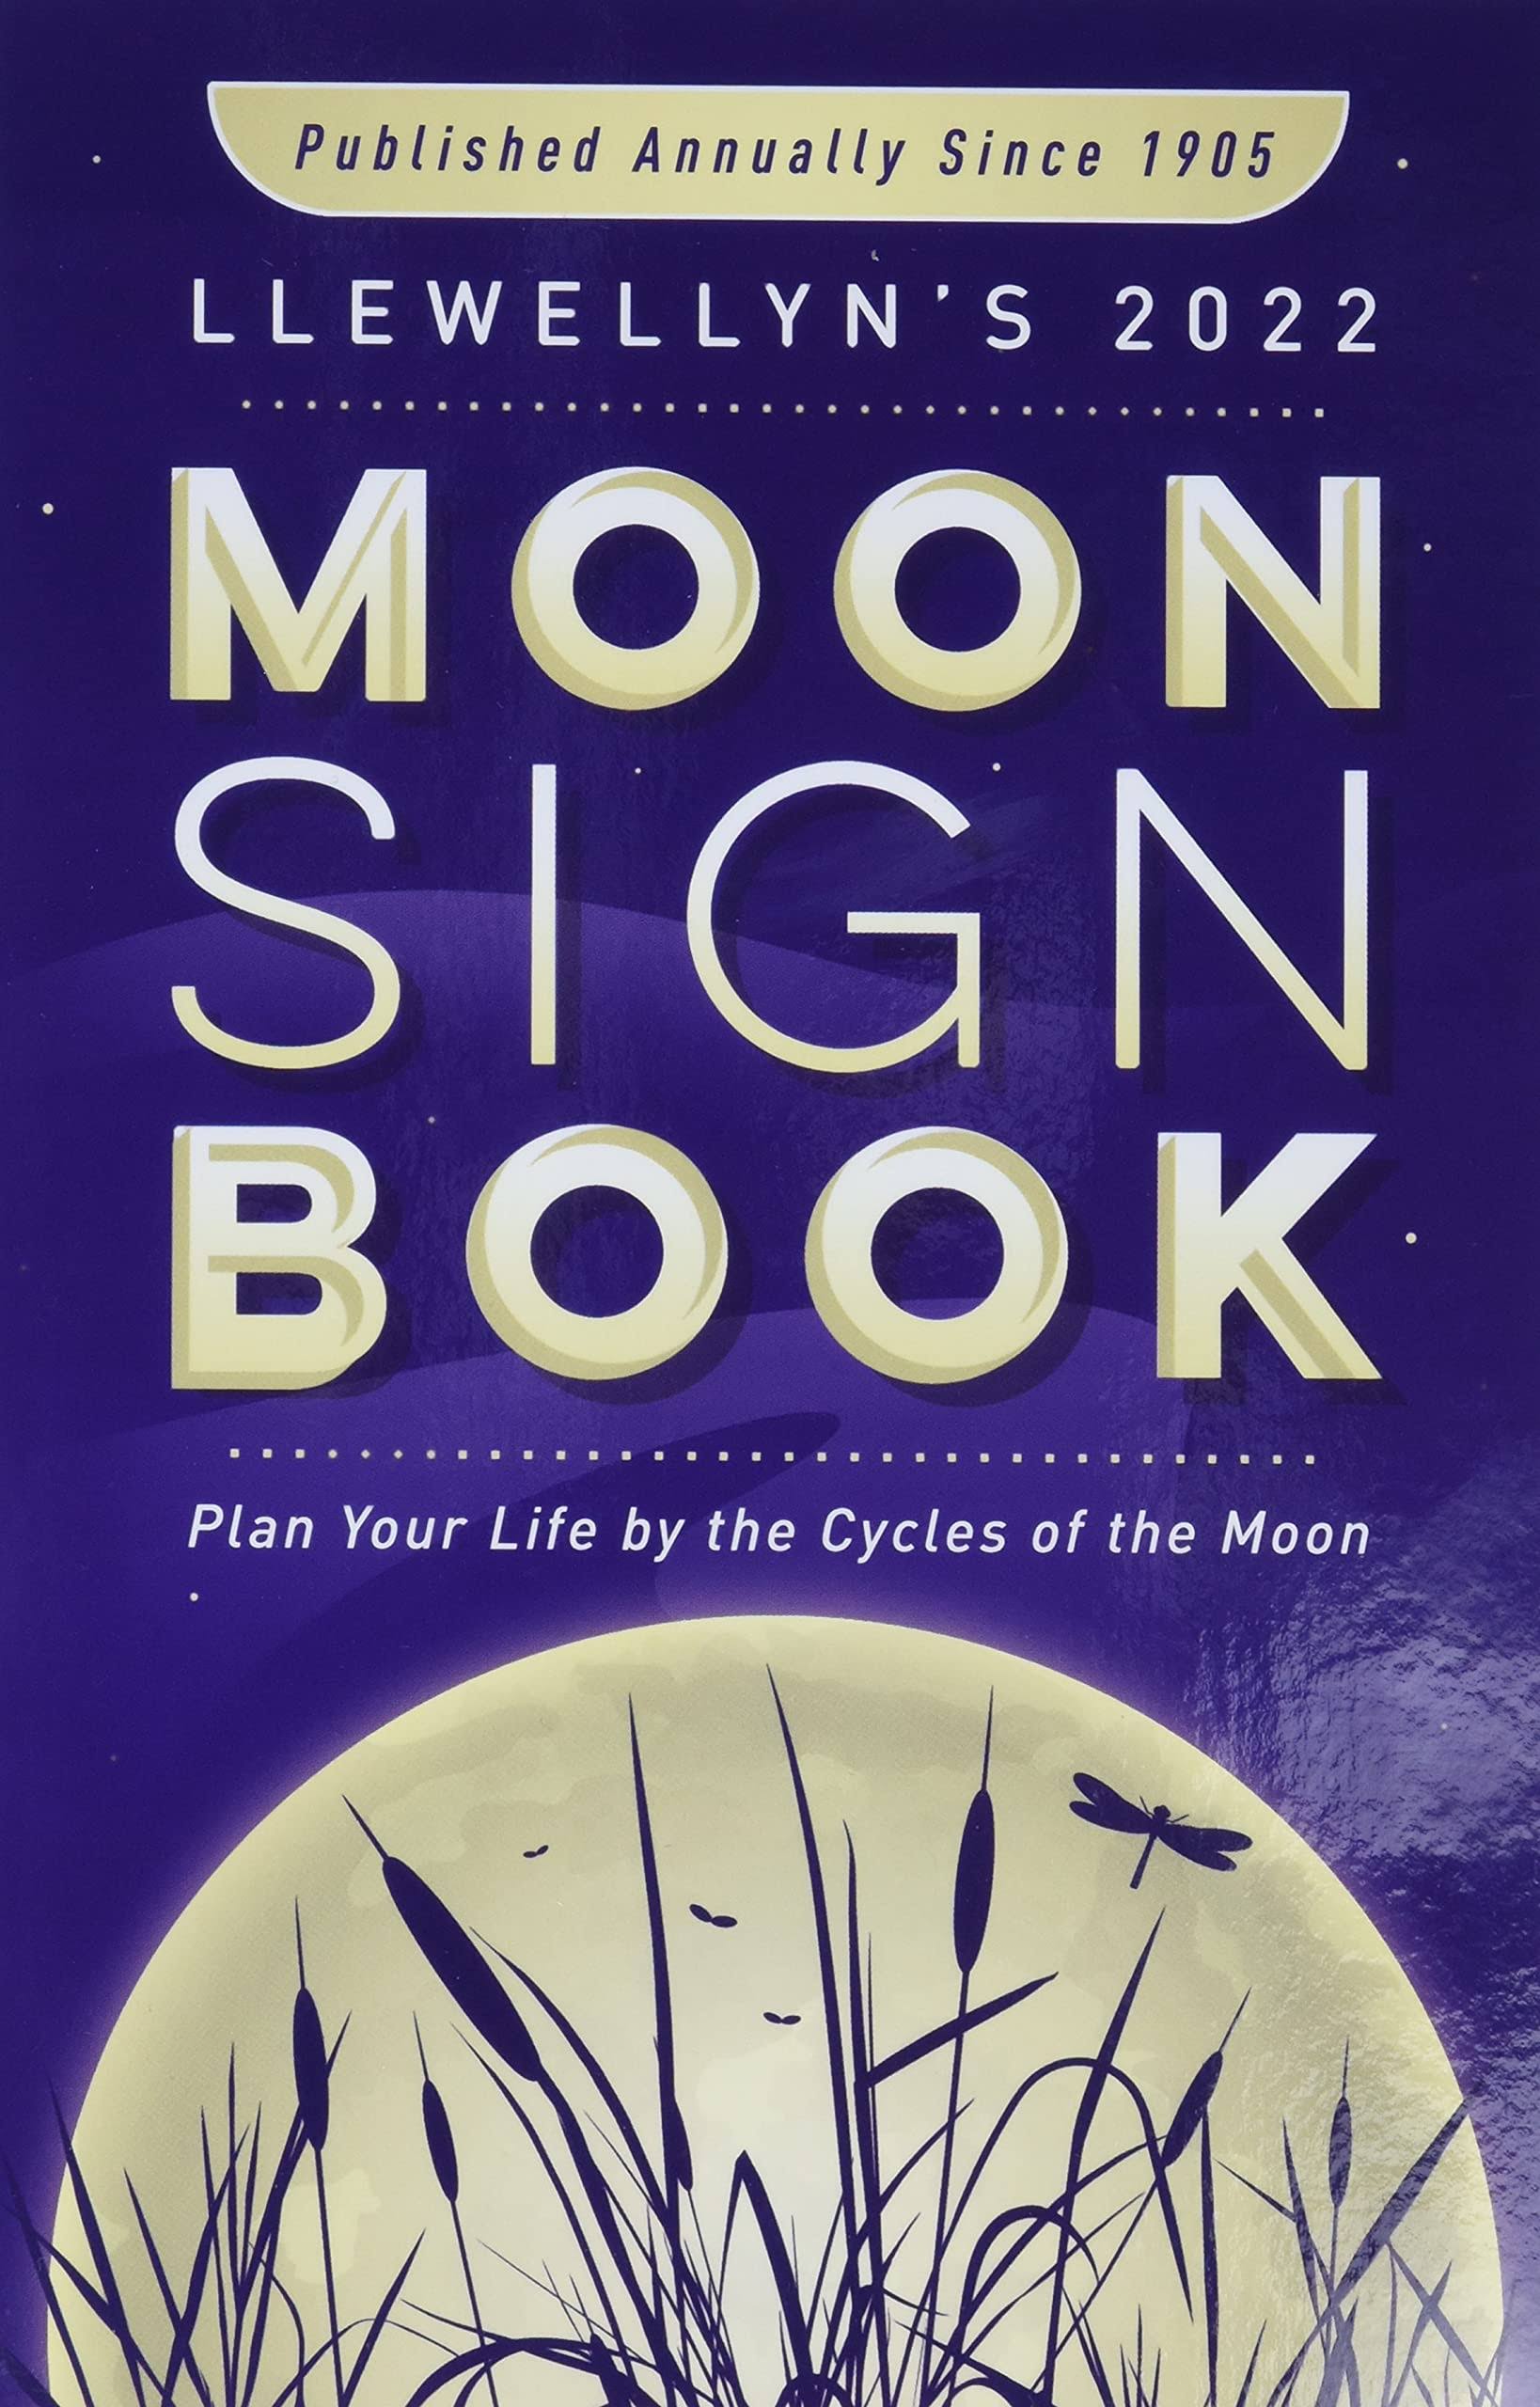 Llewellyn's 2022 Moon Sign Book: Plan Your Life by the Cycles of the Moon [Book]